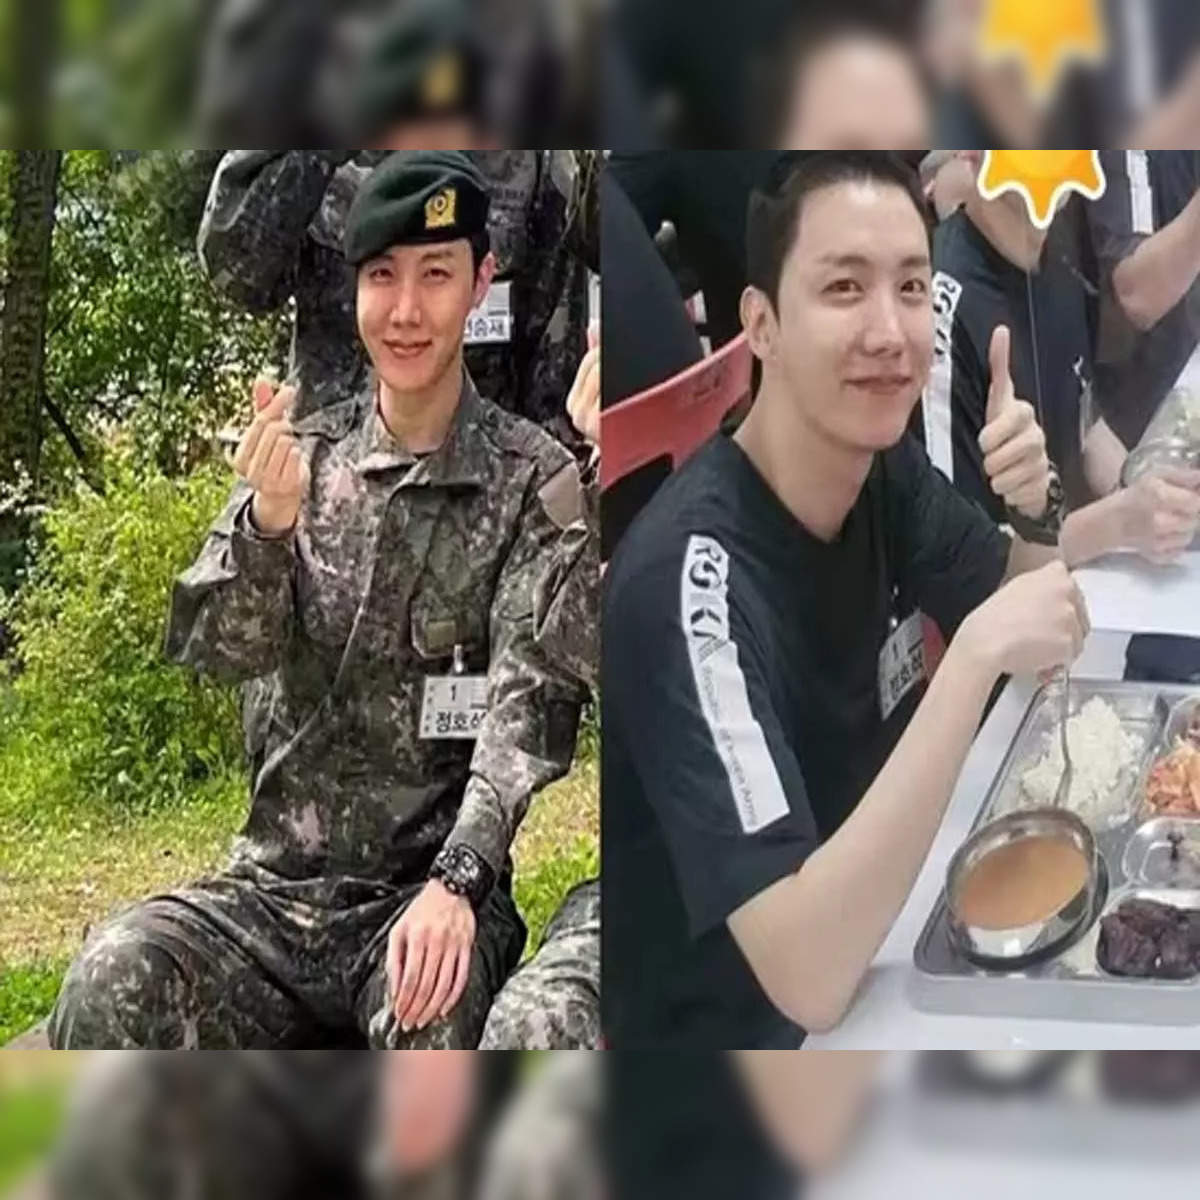 Did BTS' J-Hope Receive Special Treatment During Military